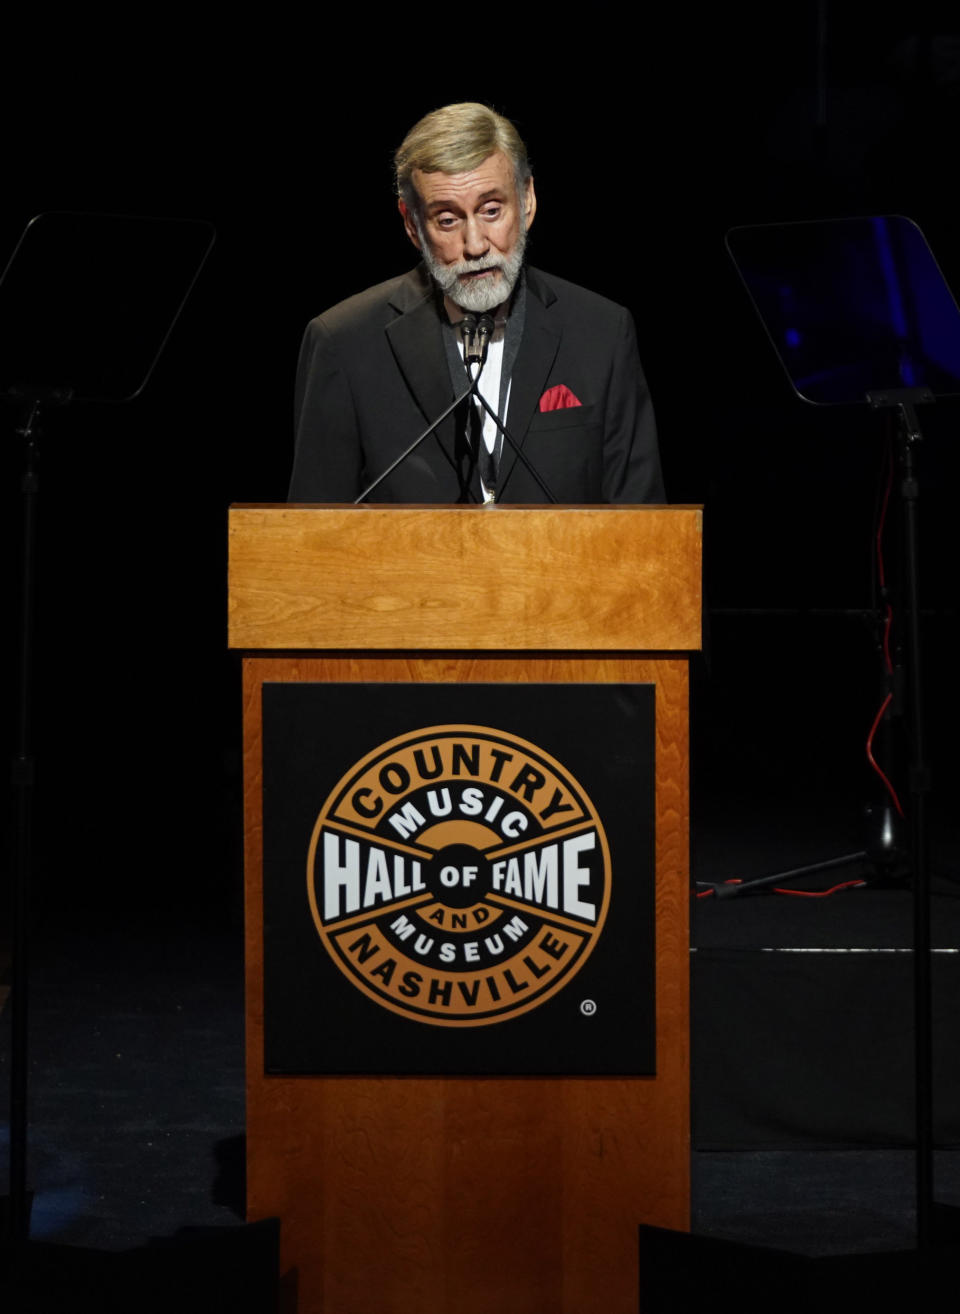 Ray Stevens speaks after being inducted into the Country Music Hall of Fame during the 2019 Medallion Ceremony at the Country Music Hall of Fame and Museum on Sunday, Oct. 20, 2019 in Nashville, Tenn. (Photo by Sanford Myers/Invision/AP)